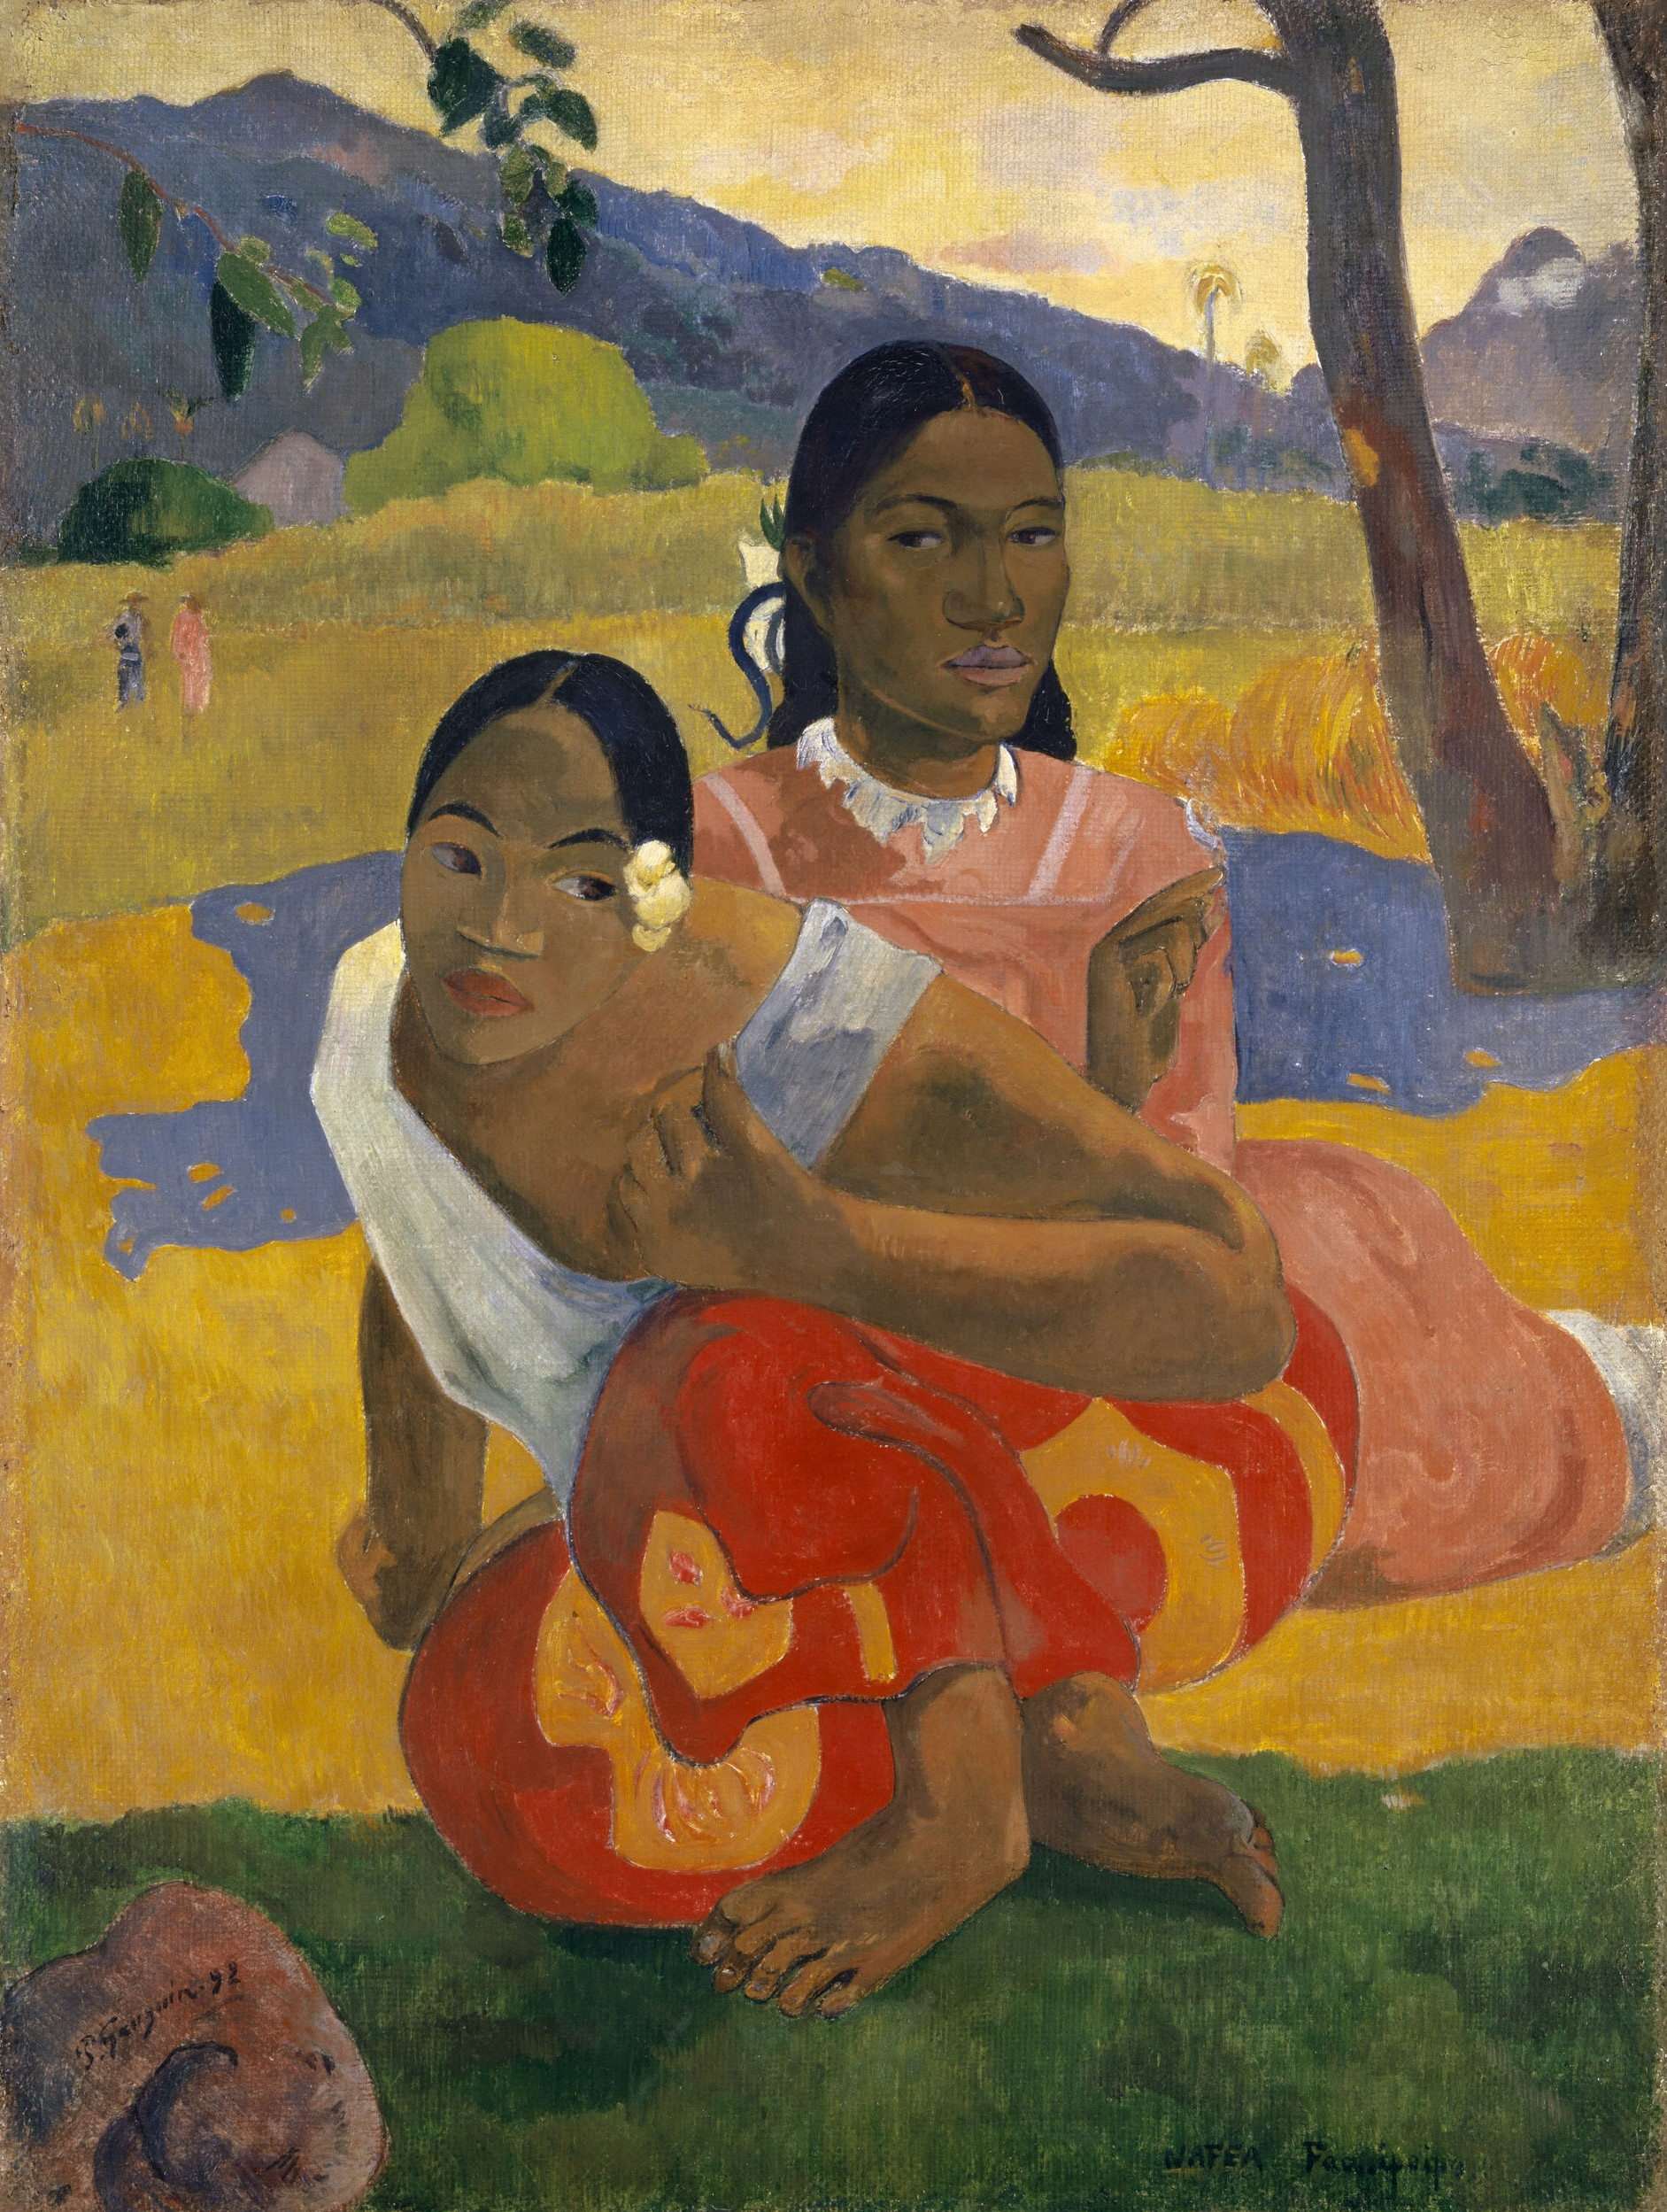 14 attractive A Vase Of Flowers by Paul Gauguin 2024 free download a vase of flowers by paul gauguin of paul gauguin wikipedia with paul gauguin nafea faa ipoipo when will you marry 1892 sold for a record us210 million in 2014